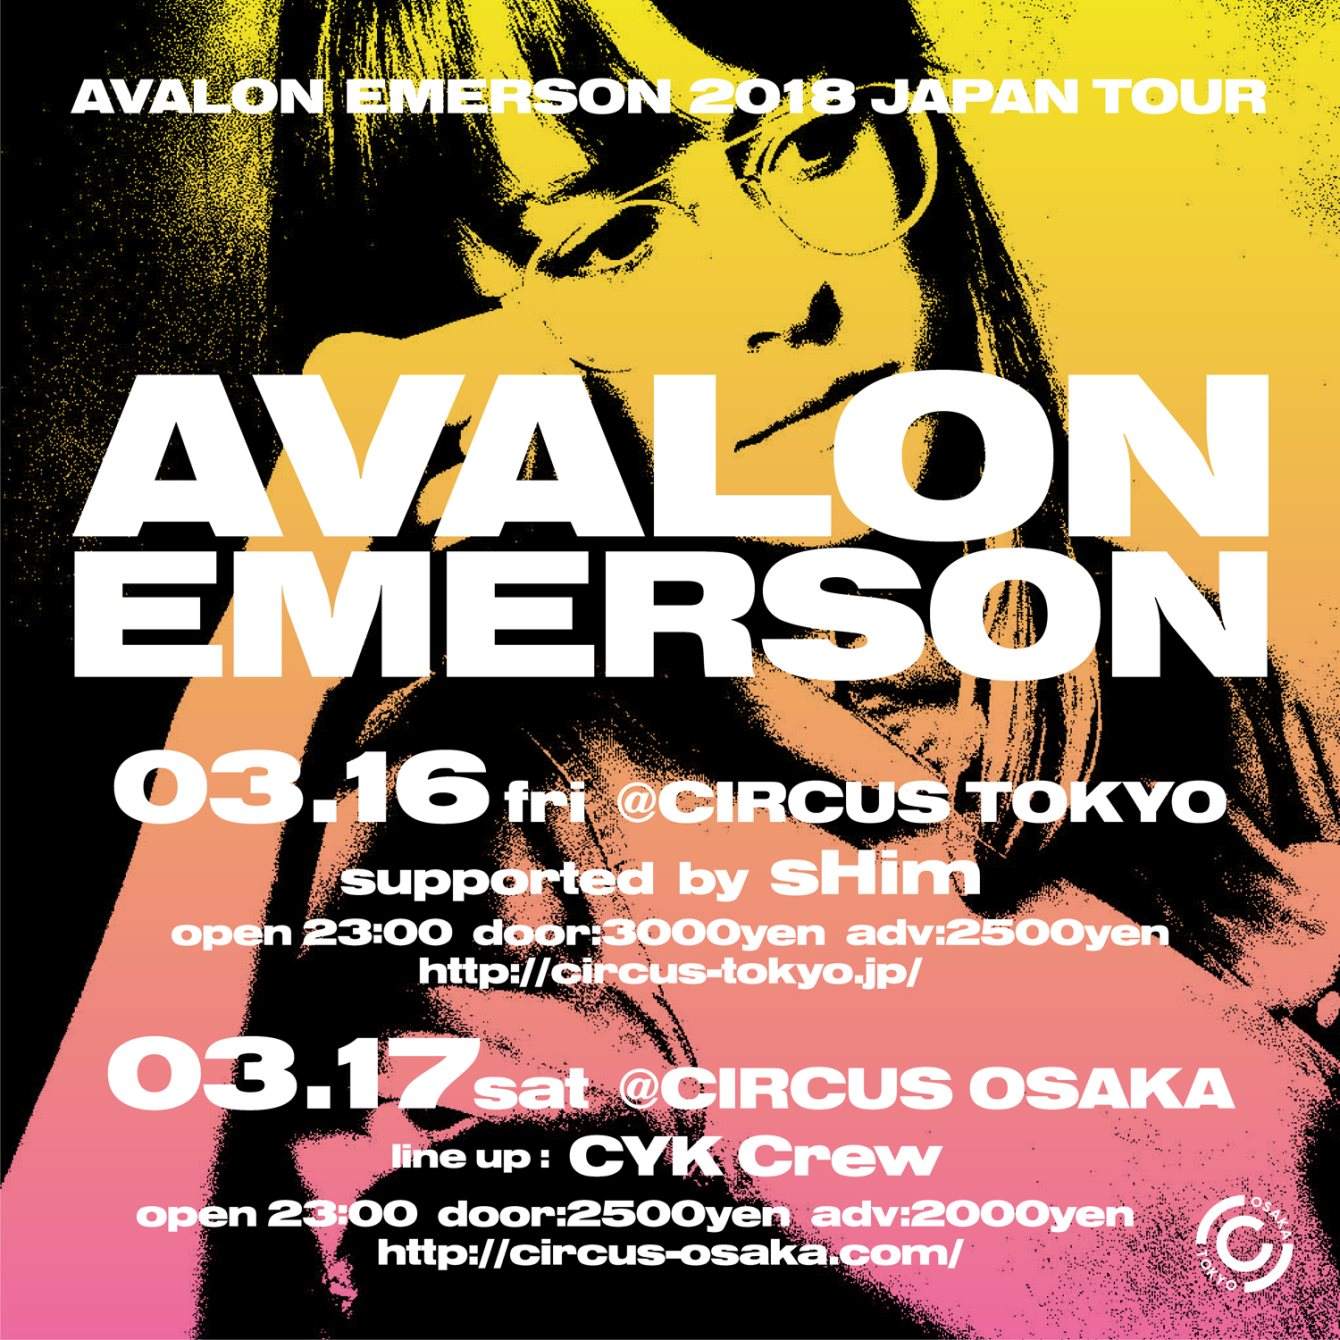 Avalon Emerson 2018 Japan Tour -Supported by Shim- - フライヤー裏